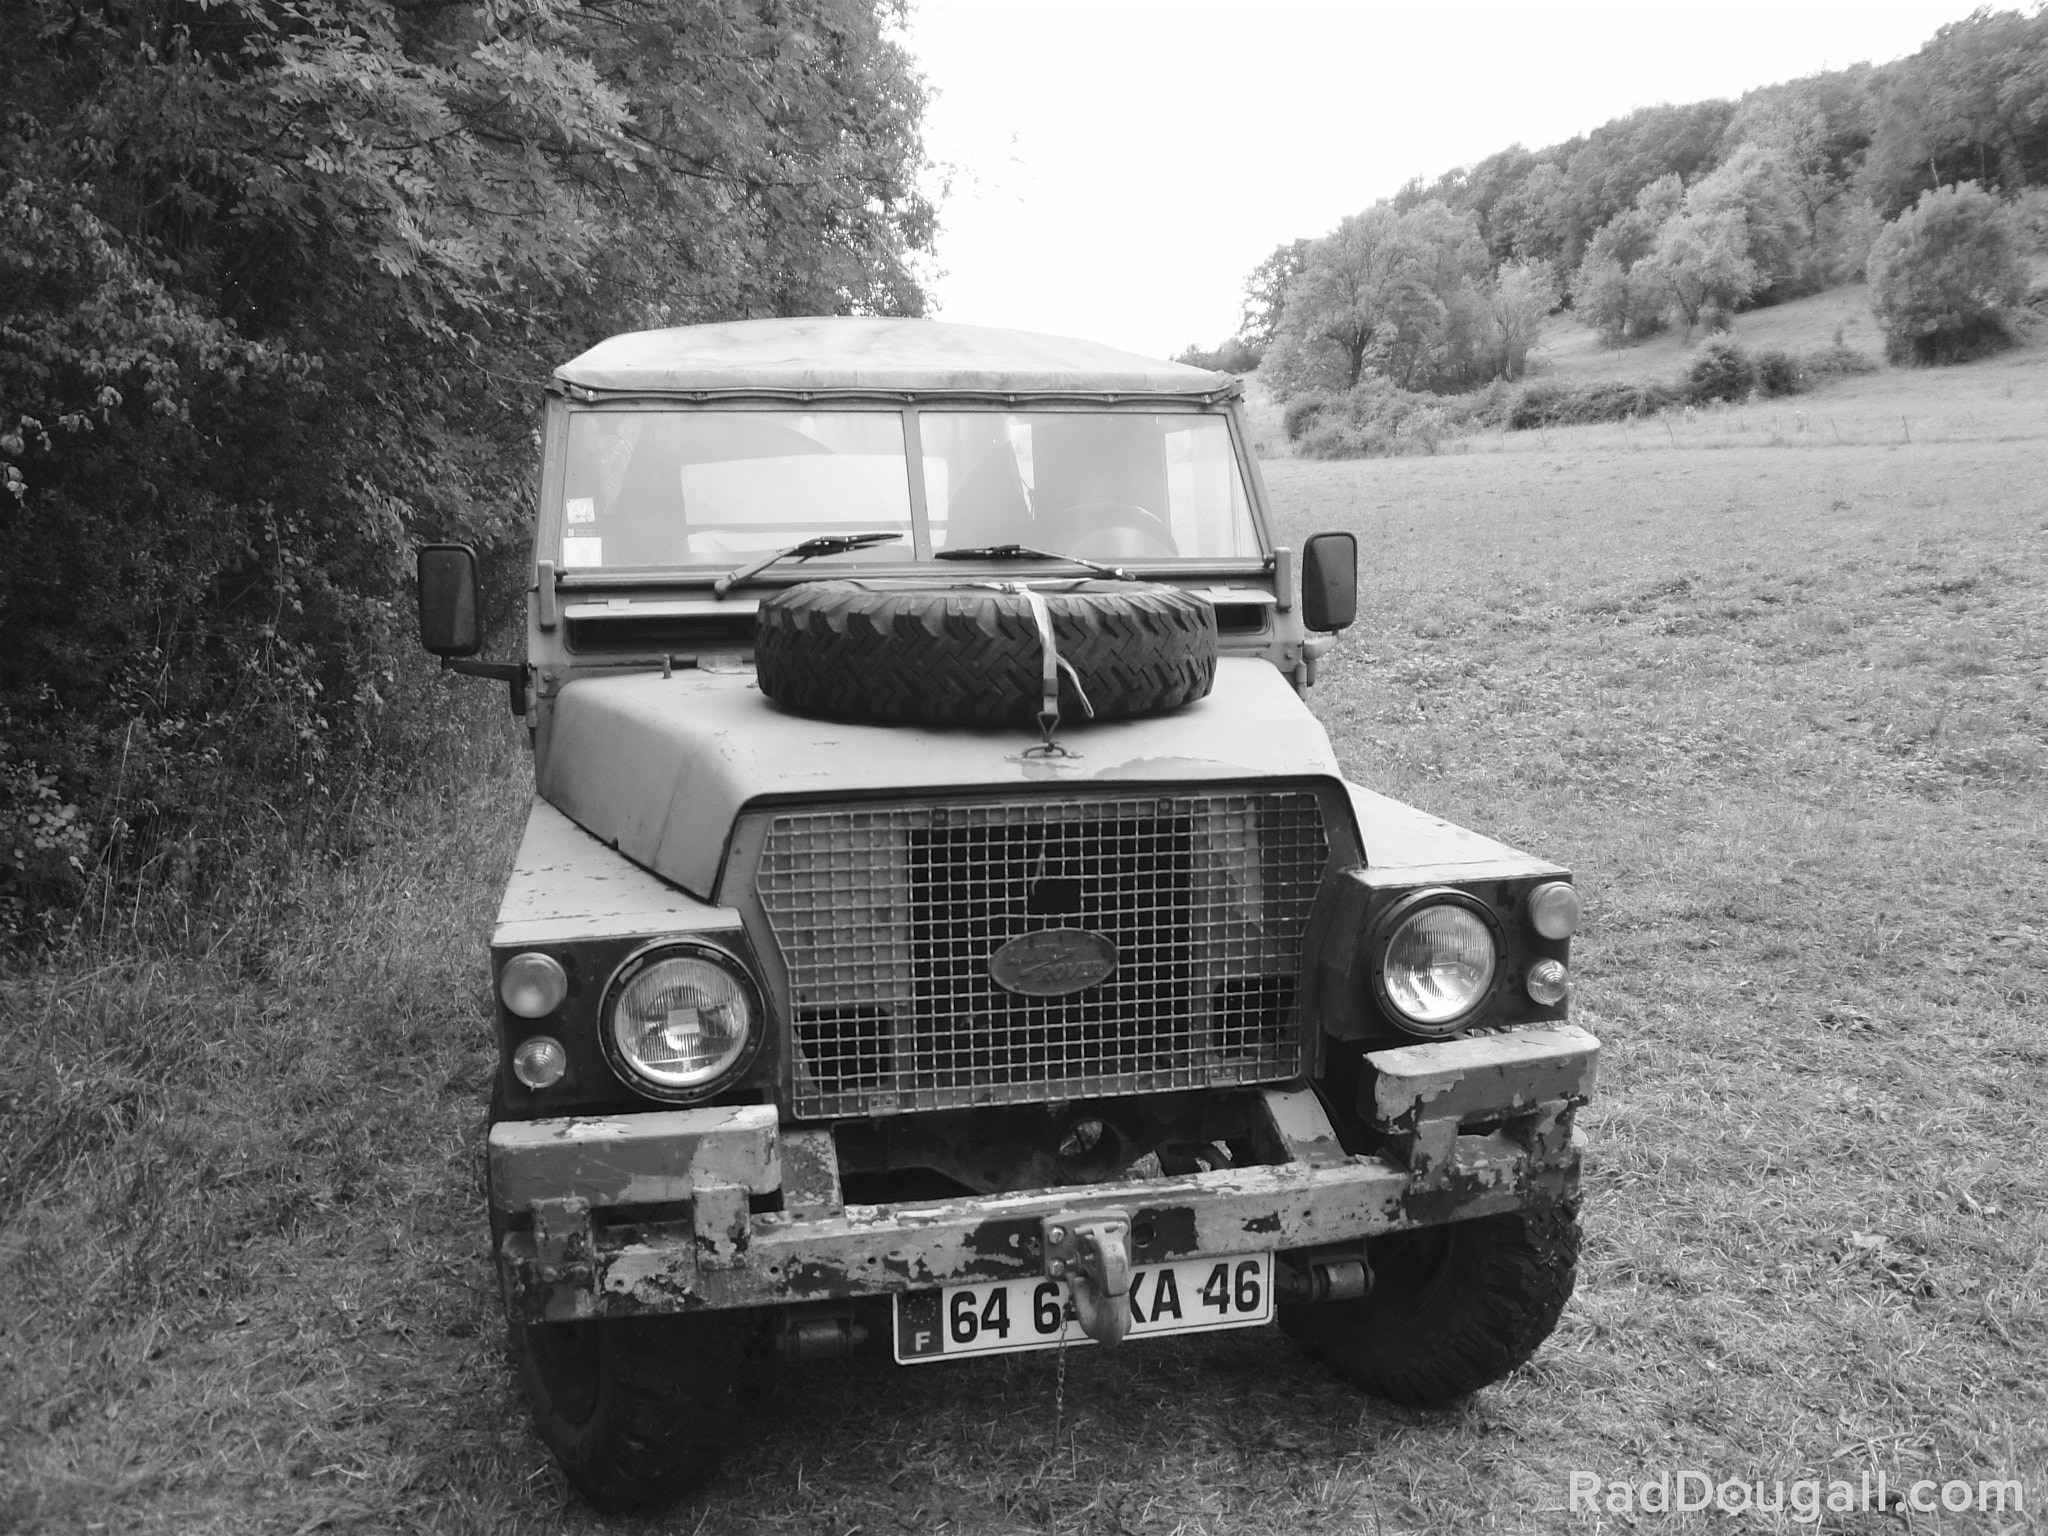 Sony Cyber-shot DSC-W170 sample photo. Classic land rover photography